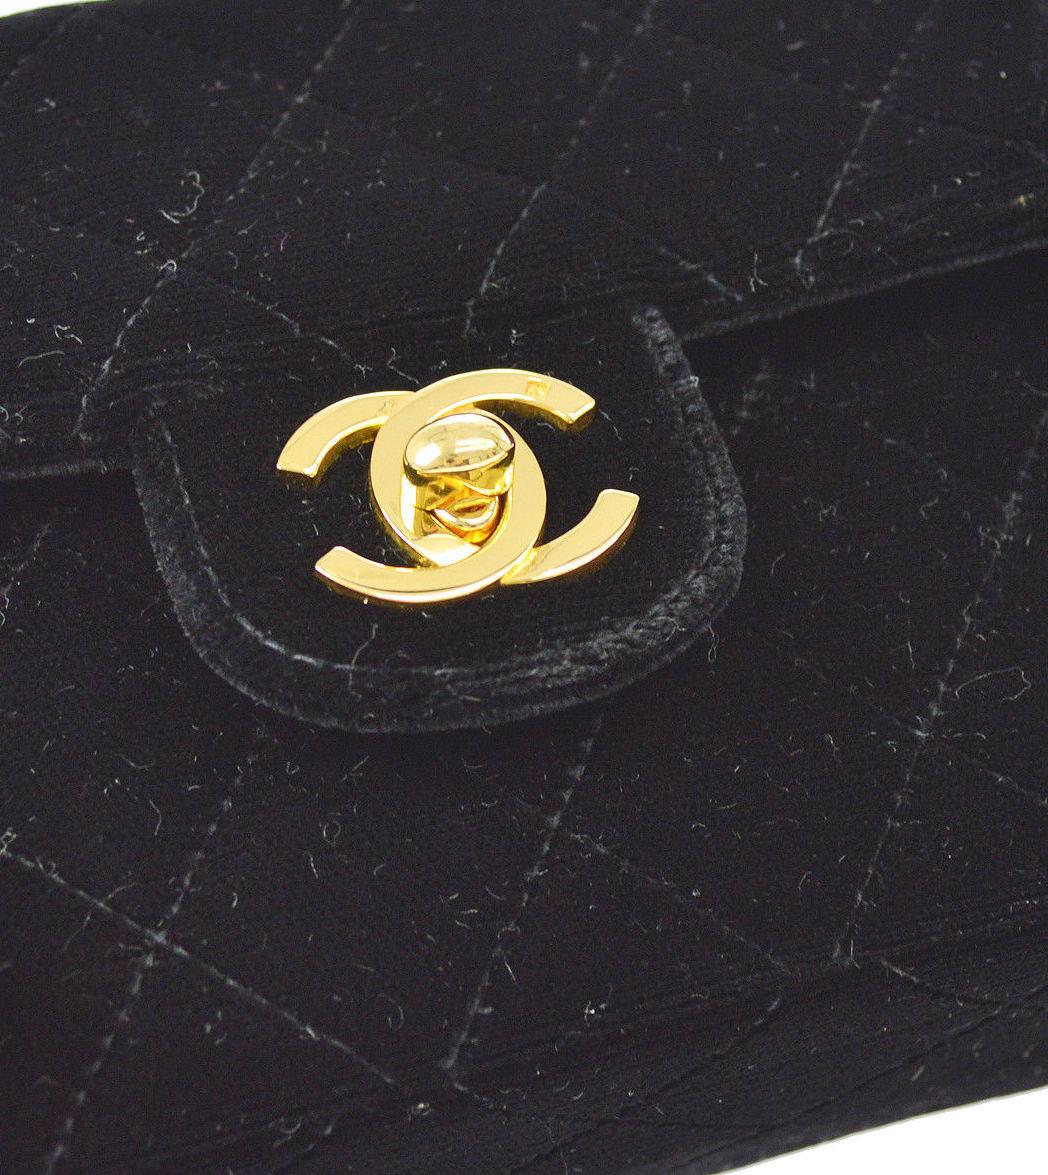 Chanel Black Velvet Top Handle Satchel Kelly Style Mini Party Evening Bag

Velvet
Gold tone hardware
Leather lining
Date code present
Made in France
Turnlock closure
Handle drop 3